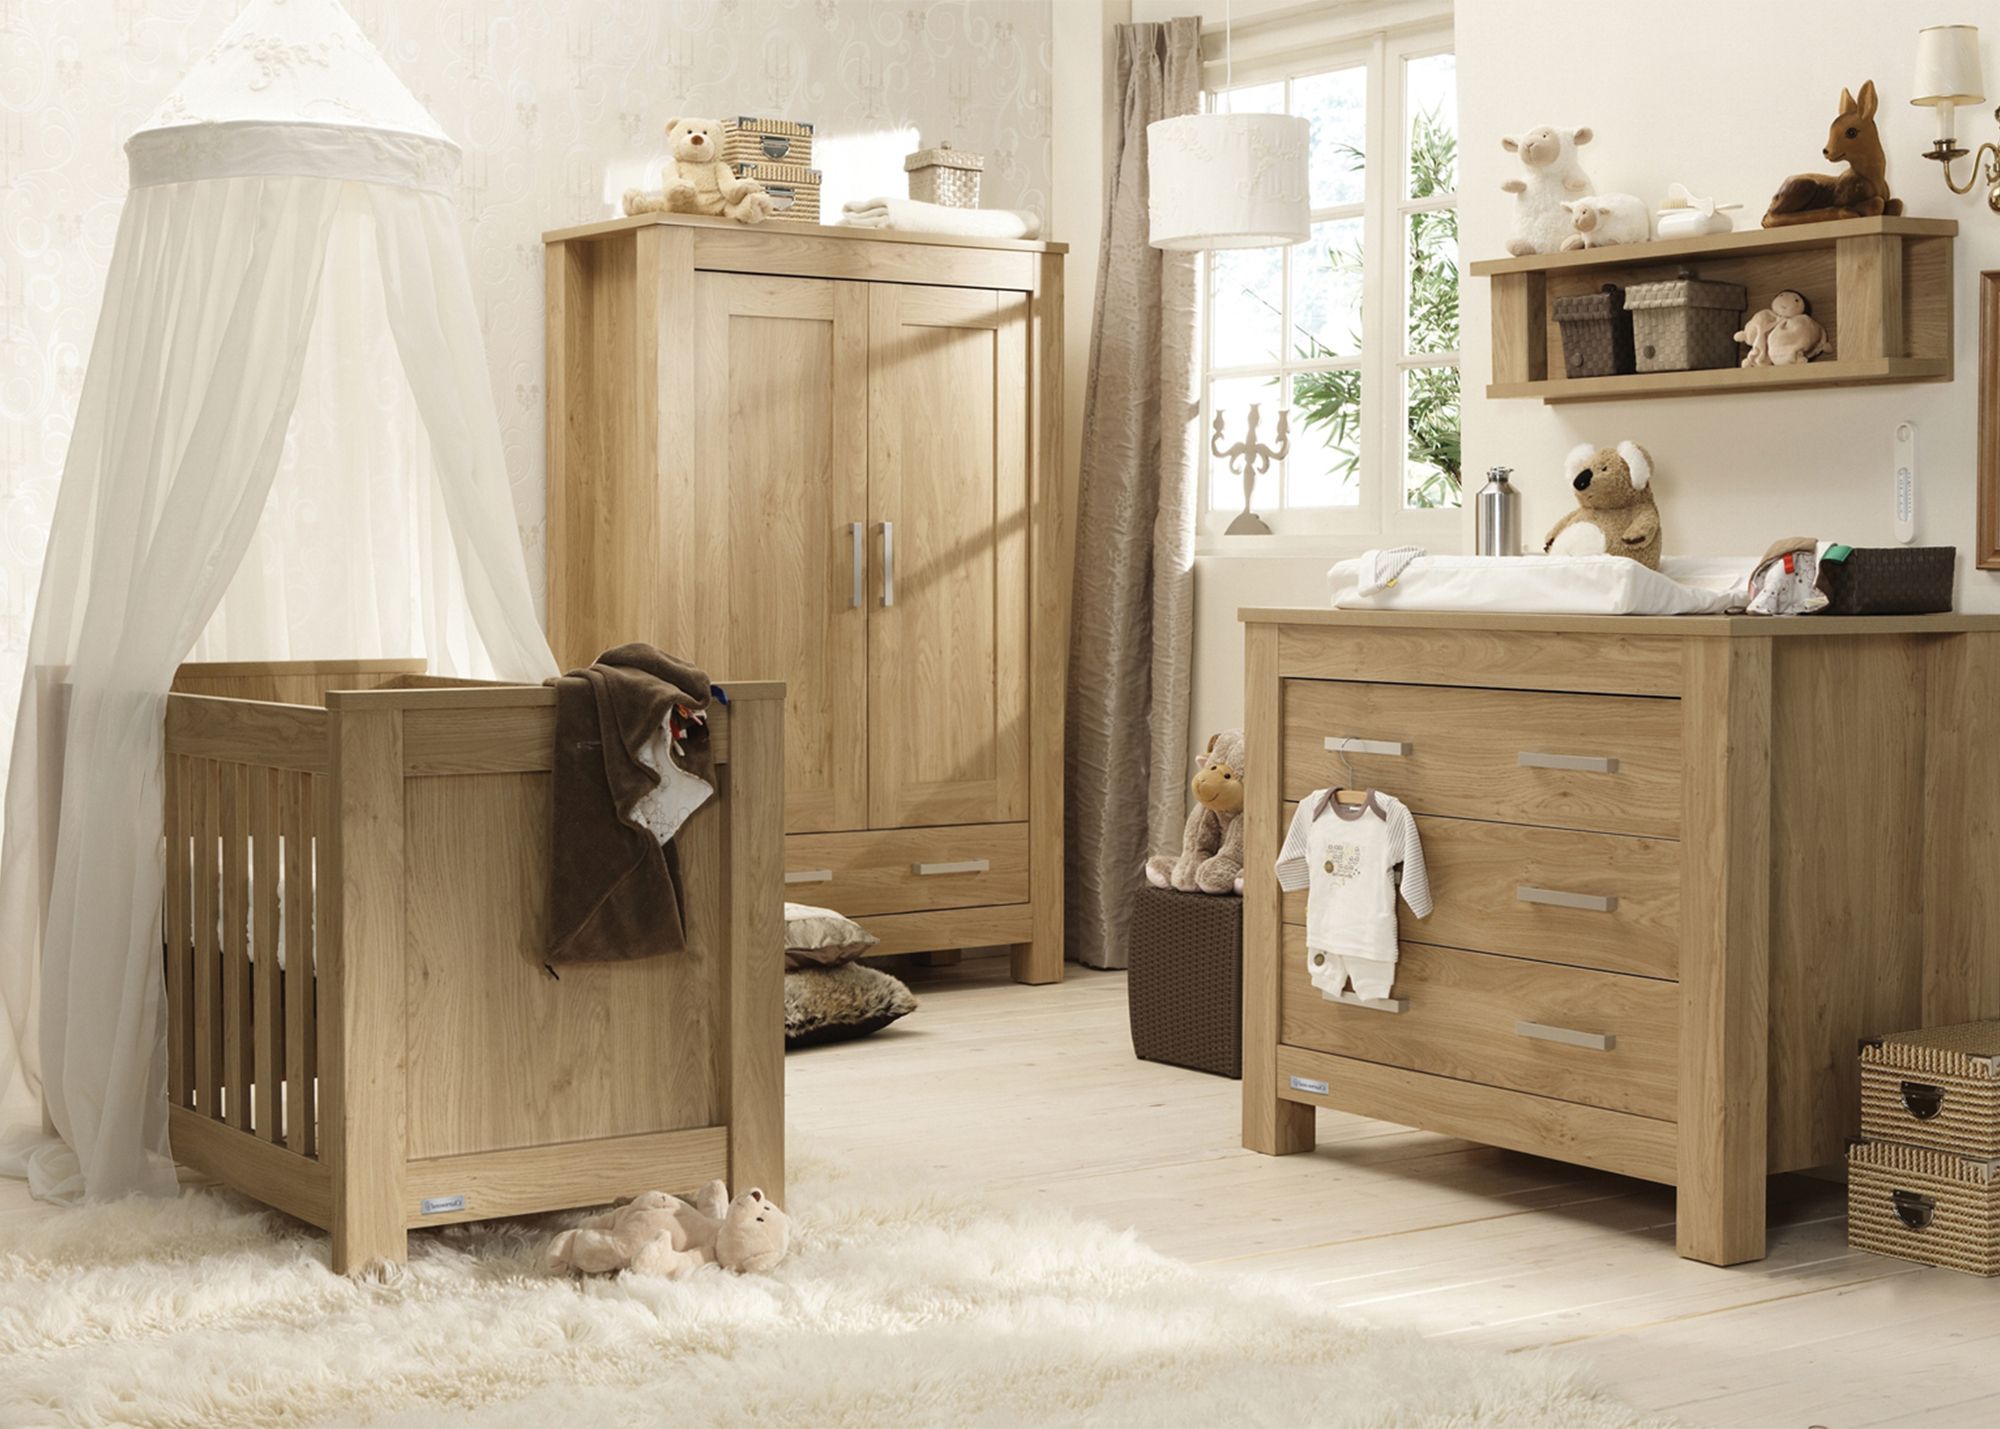 Bordeaux Oak | Babystyle Prams & Strollers Pertaining To Bordeaux Wardrobes (View 4 of 20)